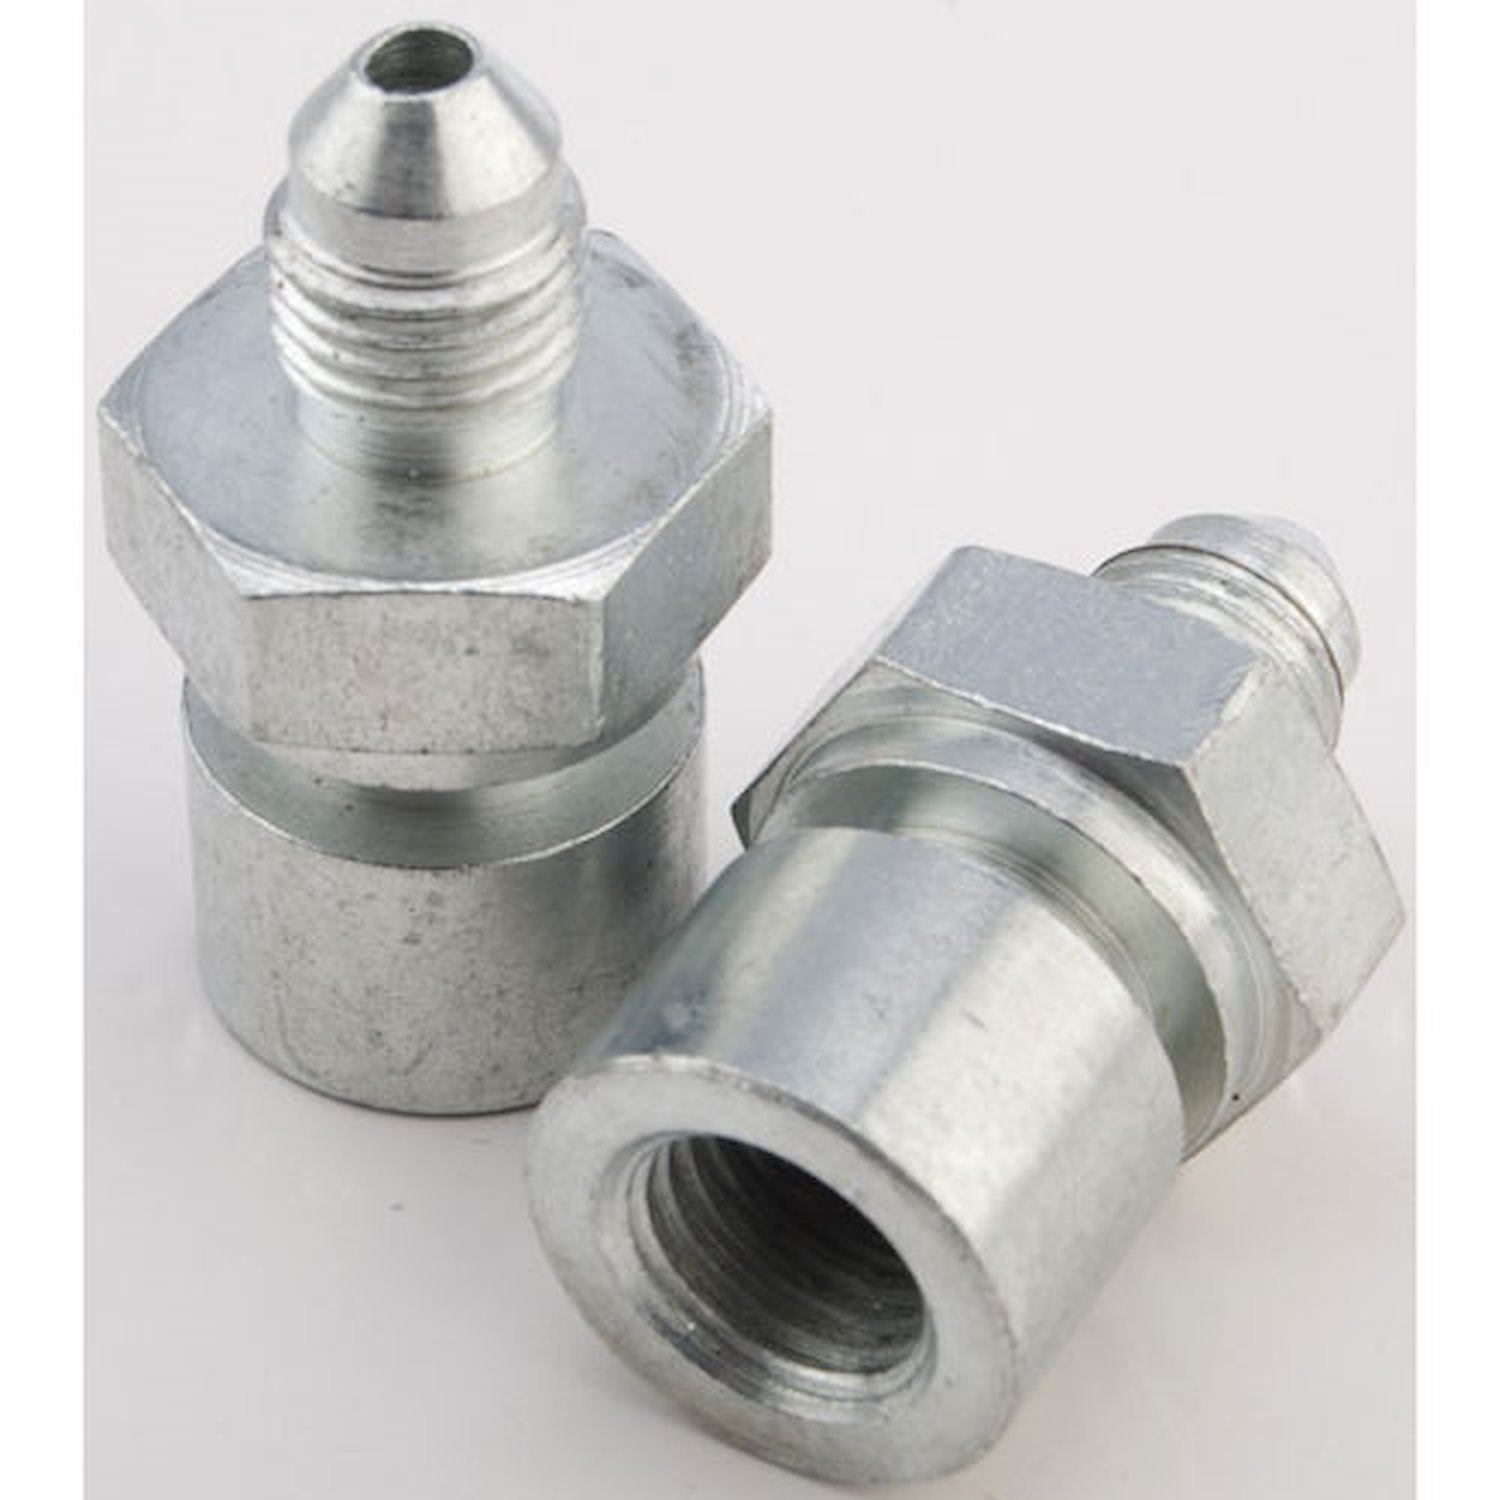 AN to Inverted Flare Female Tube Adapter Fittings [-3 AN x 10mm x 1.25 Inverted Flare]